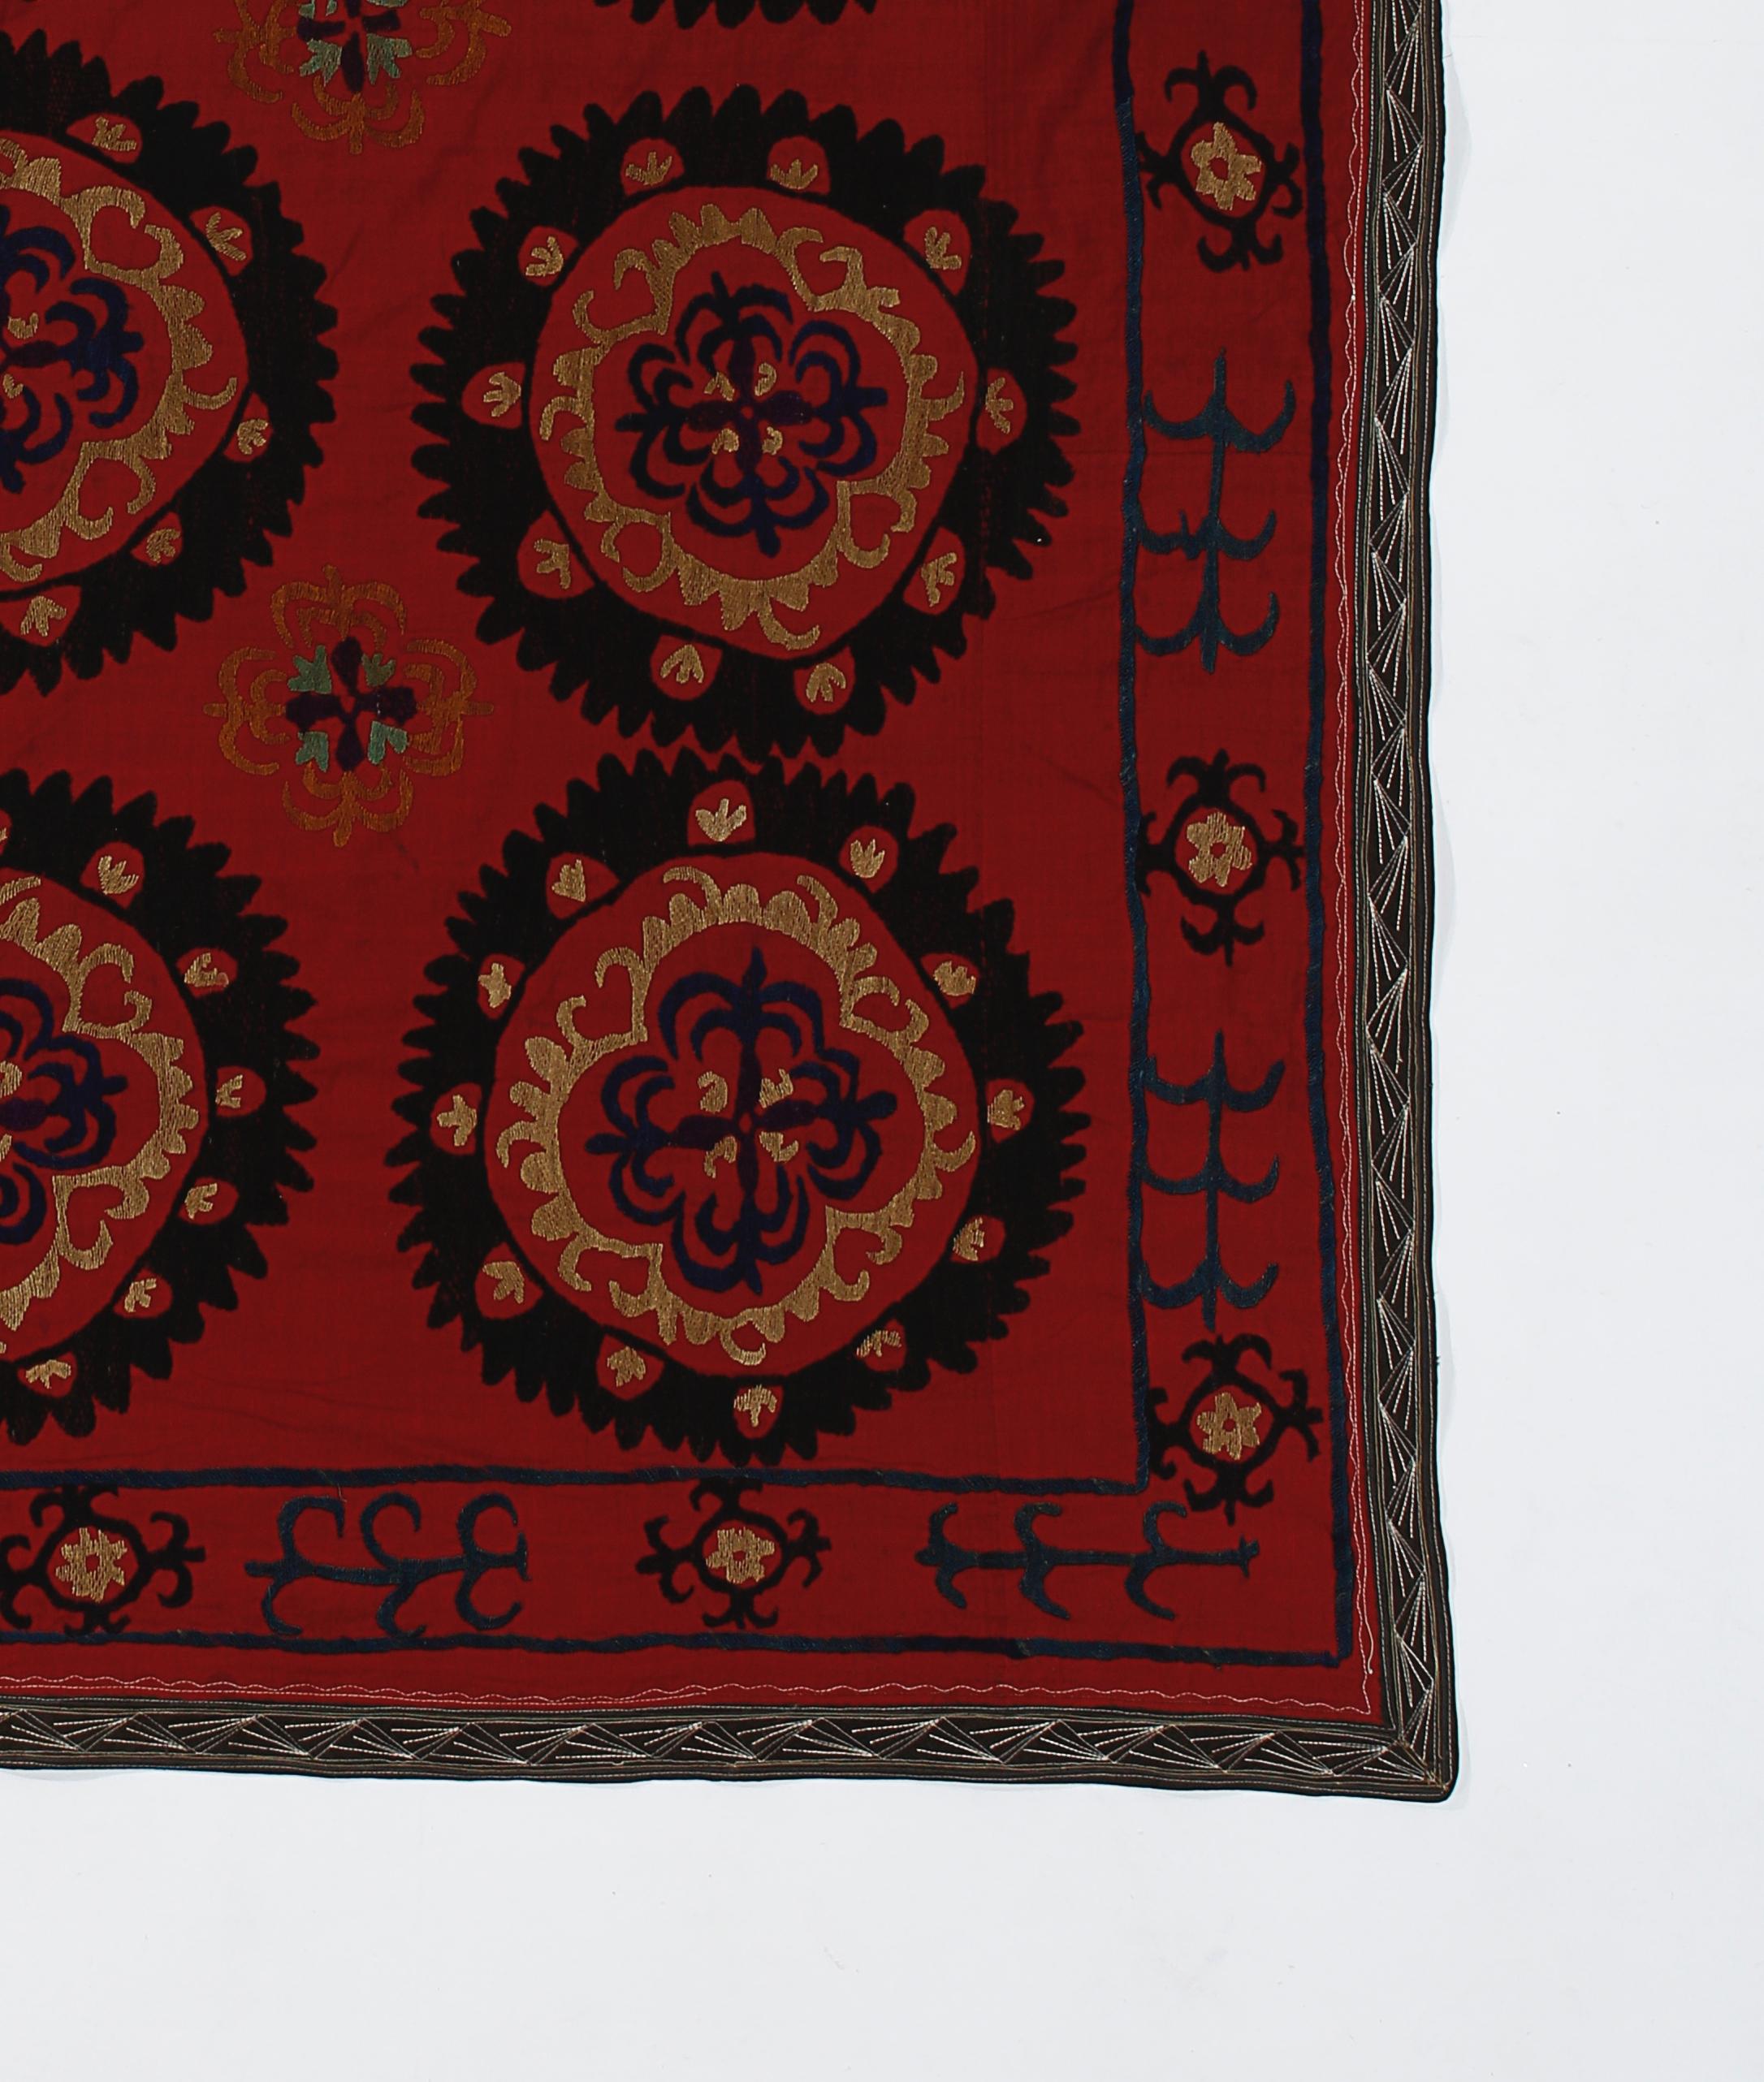 Cotton Vintage Suzani Bed Cover, Silk Embroidery Handmade Uzbek Wall Hanging